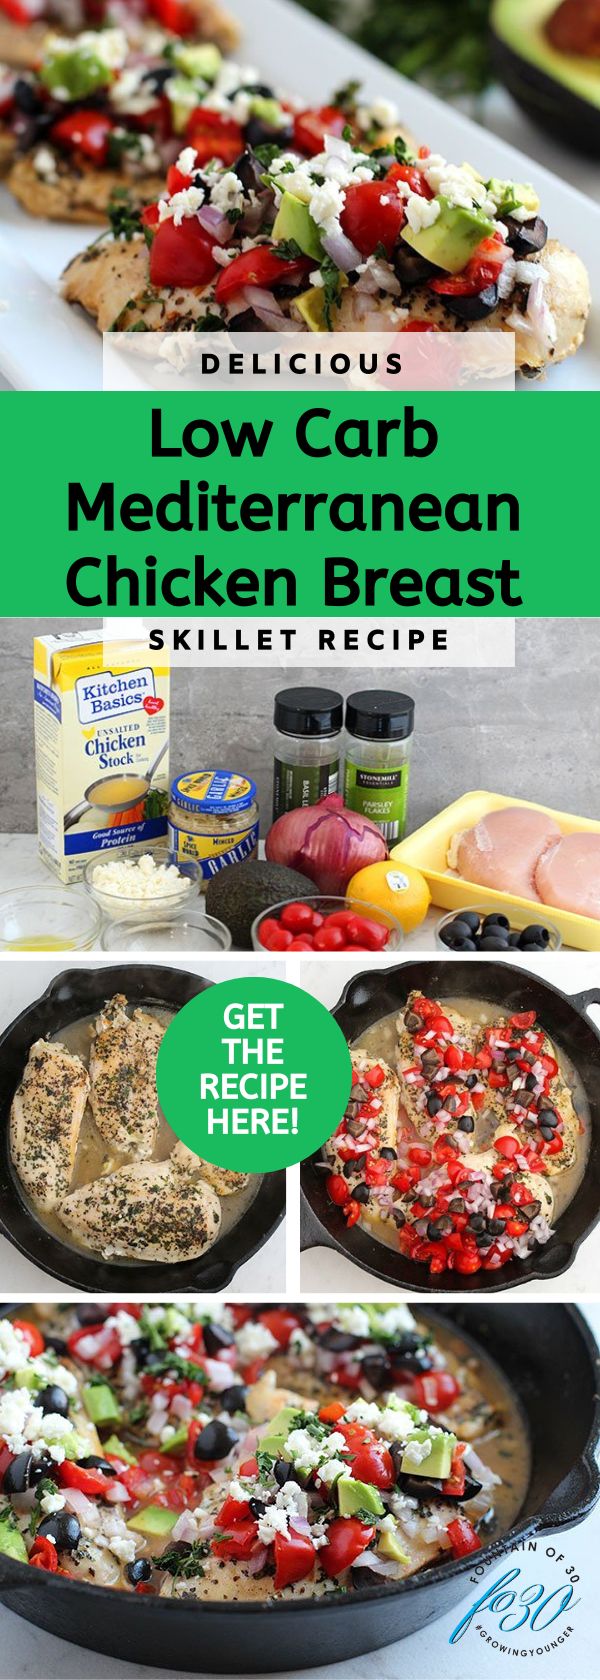 low carb chicken breast in a skillet fountainof30